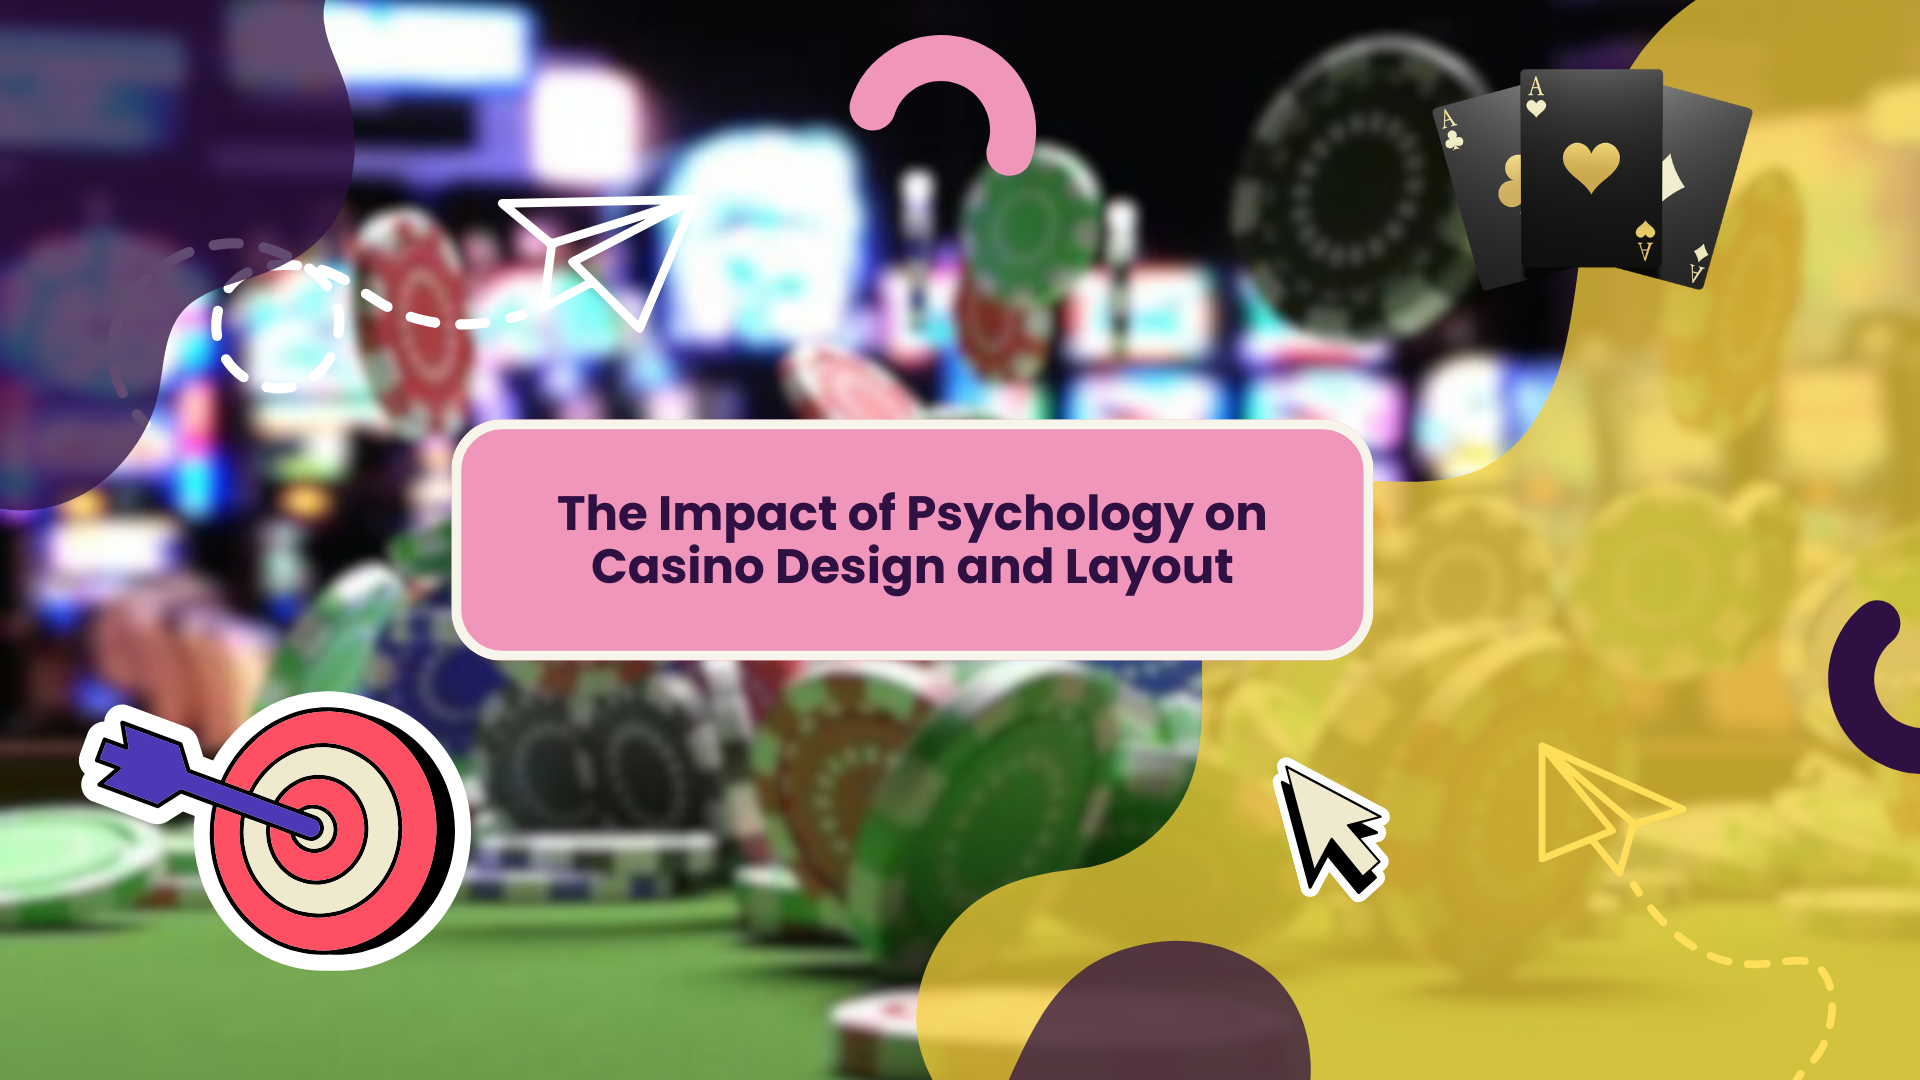 The Impact of Psychology on Casino Design and Layout